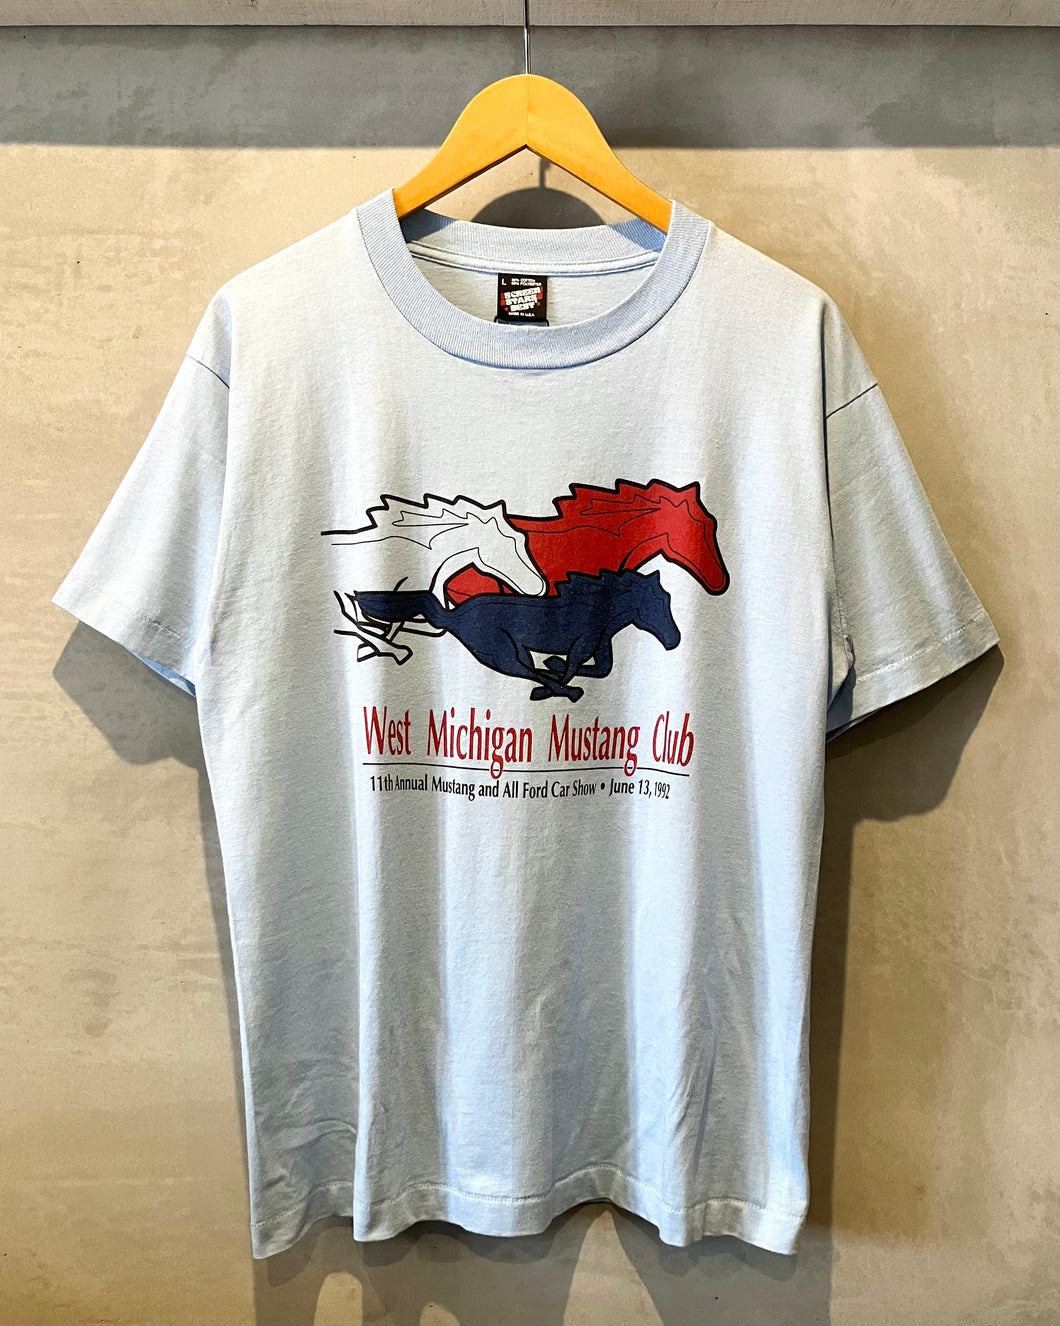 90’s West Michigan Mustang Club-T-shirt-(size L)Made in U.S.A.